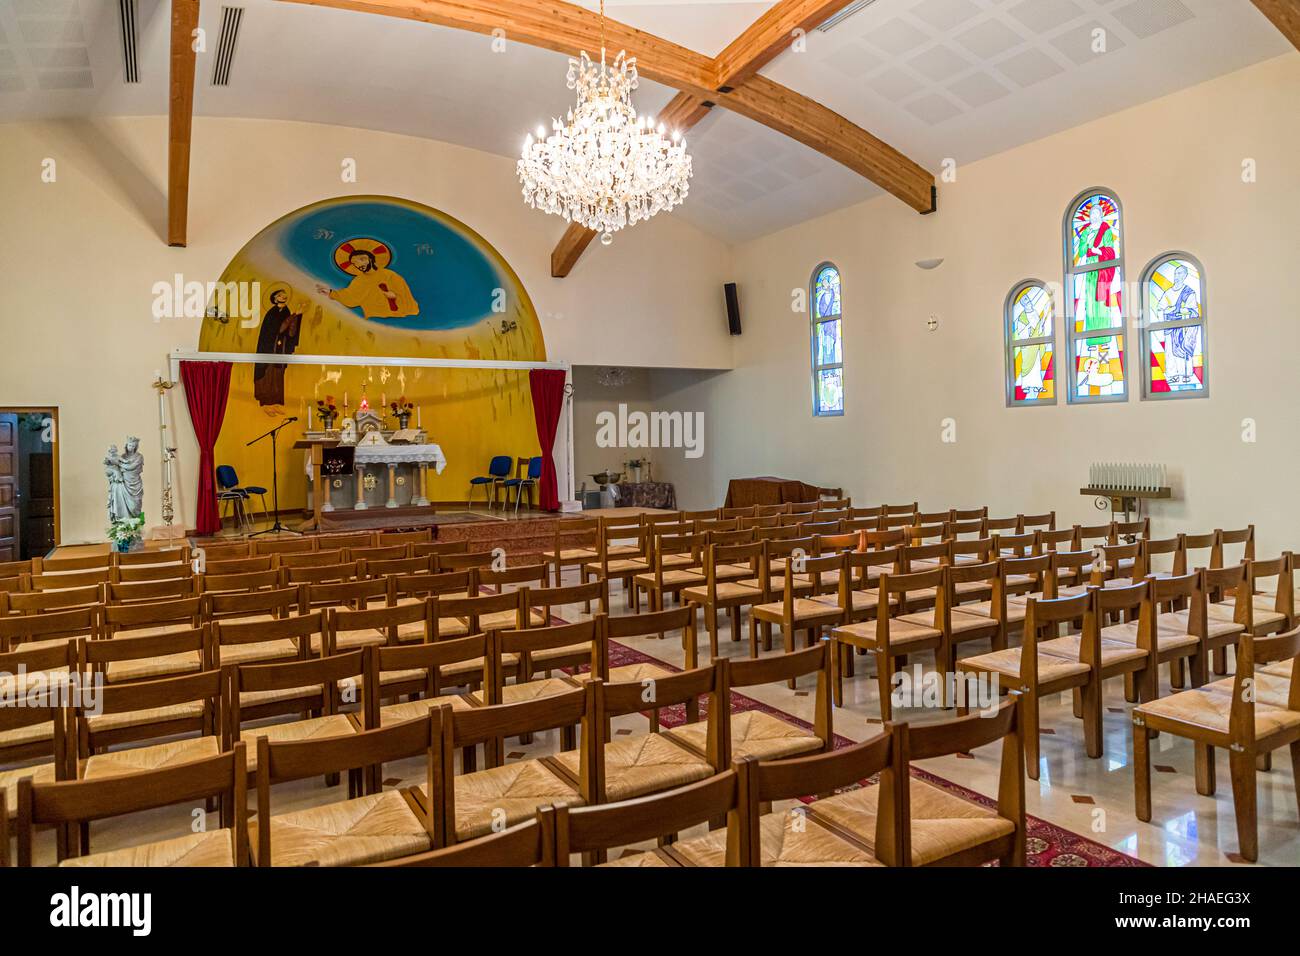 The Armenian Church in Saint-Chamond, France. Armenian parish exists since the end of the 1st World War. Since 2015, the parish is led by Father Antranik Stock Photo